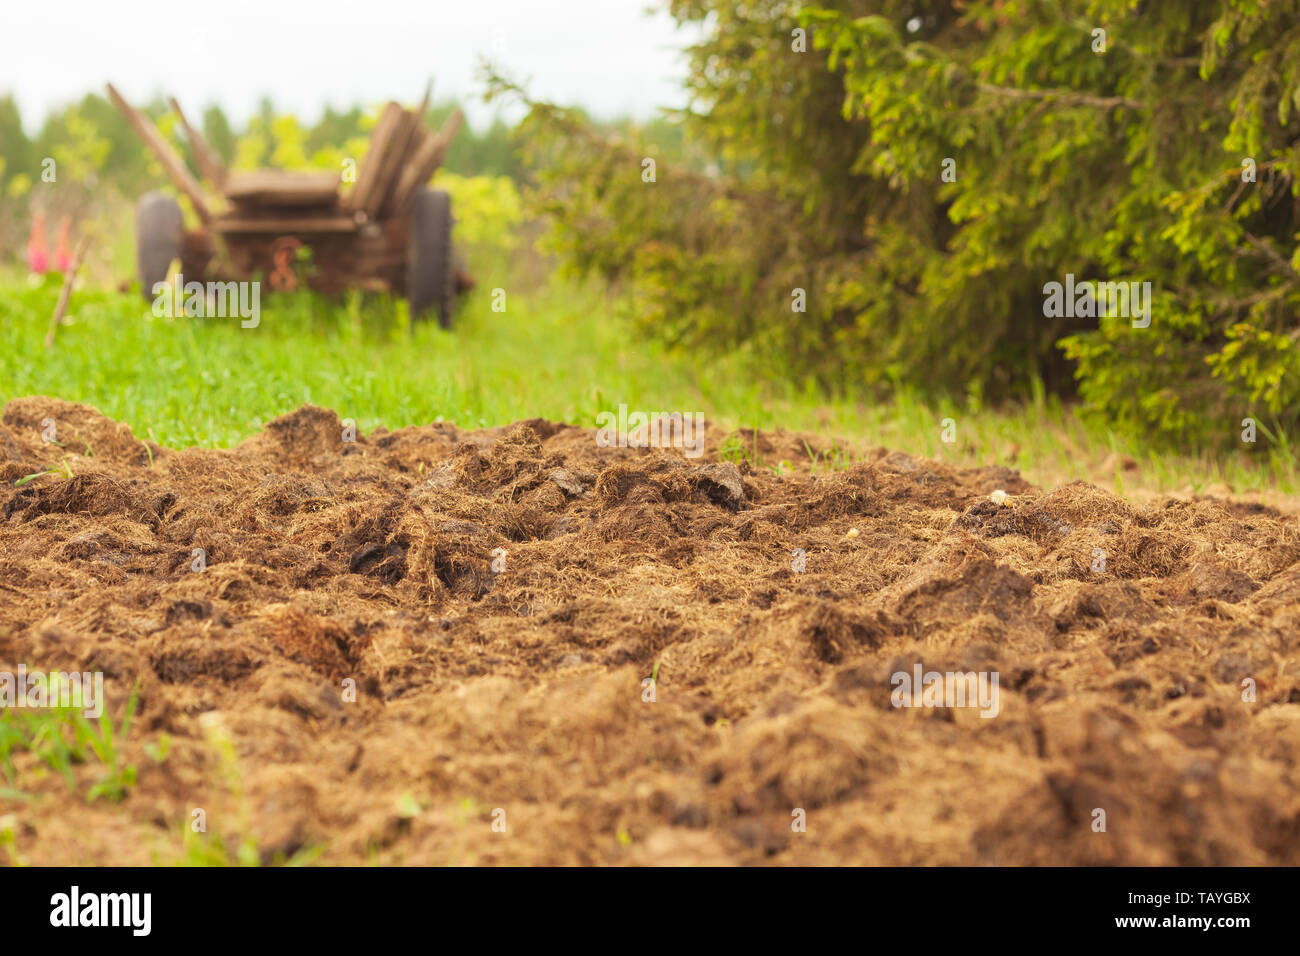 Manure From Cows On An Agricultural Field A Pile Of Natural